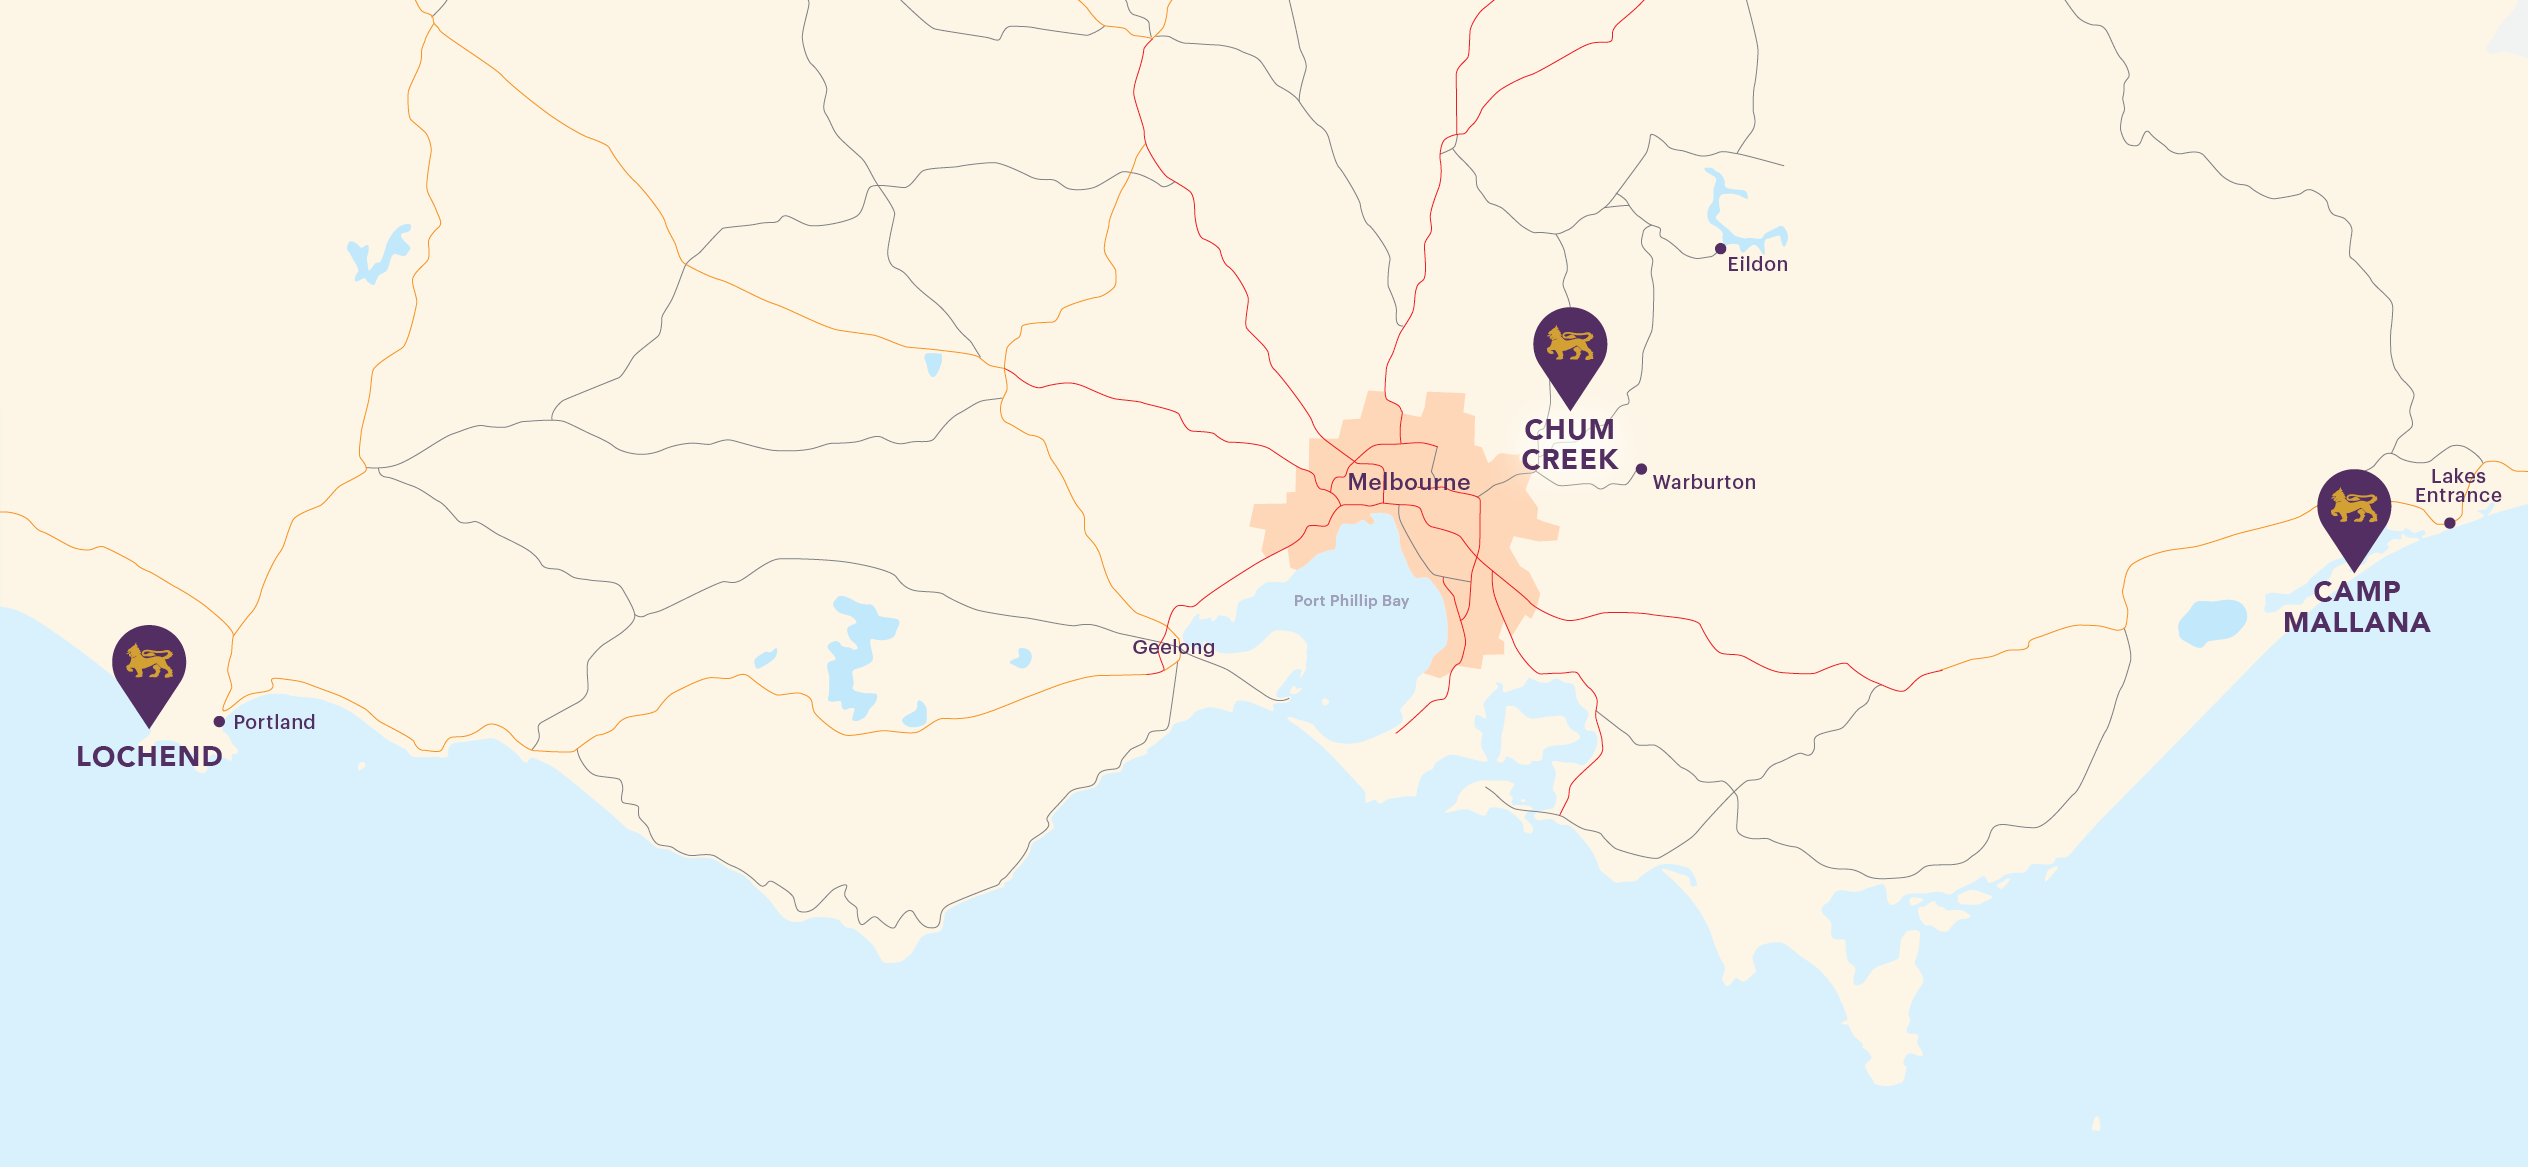 Map of Wesley College's outdoor education sites in Victoria